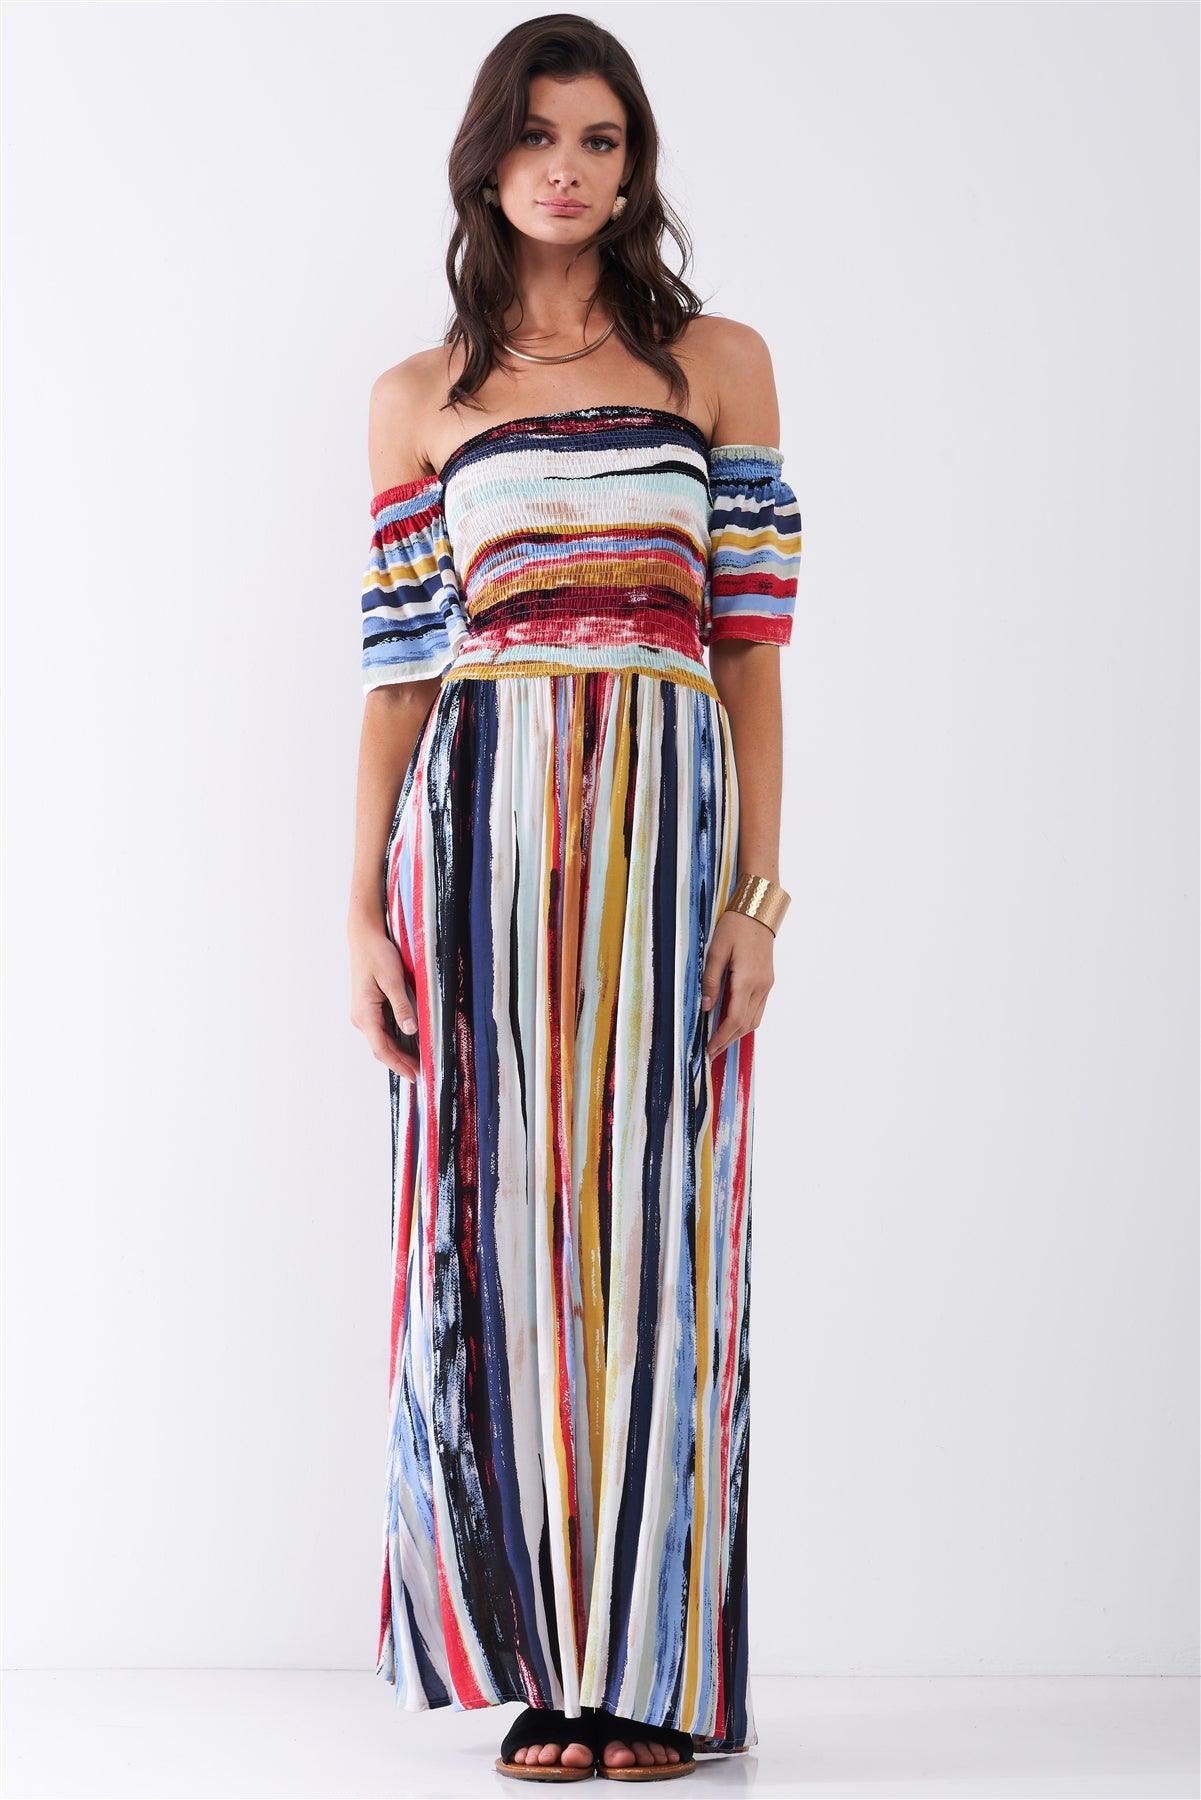 Navy Multicolor Brushed Stripe Print Off-The-Shoulder Puff Sleeve Smock Lace-Up Detail Summer Maxi Dress /2-2-2